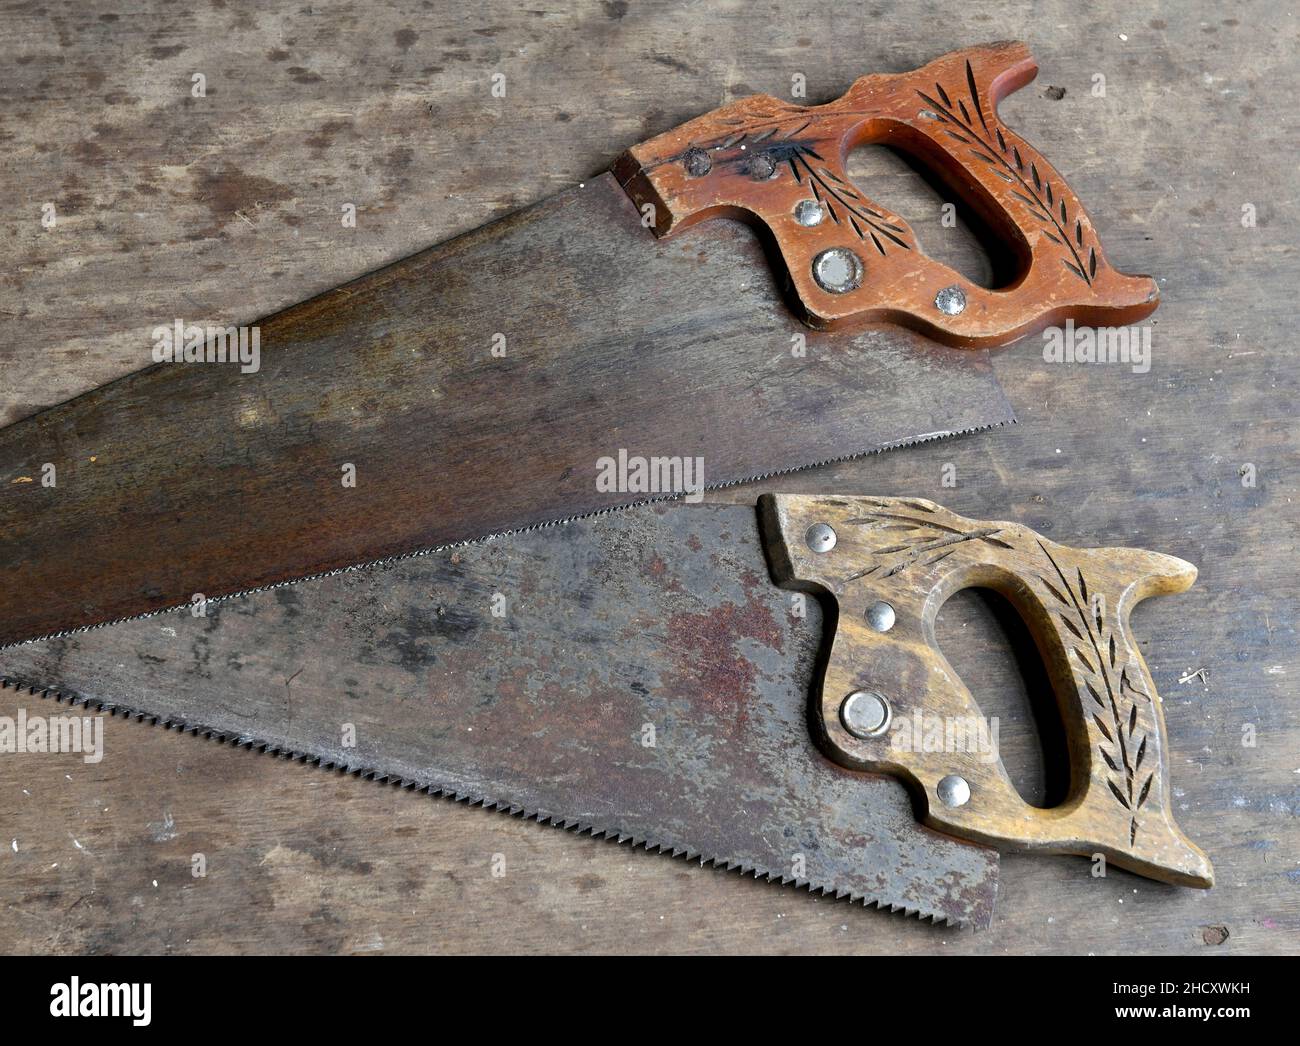 Vintage tools and handles with wood background Stock Photo